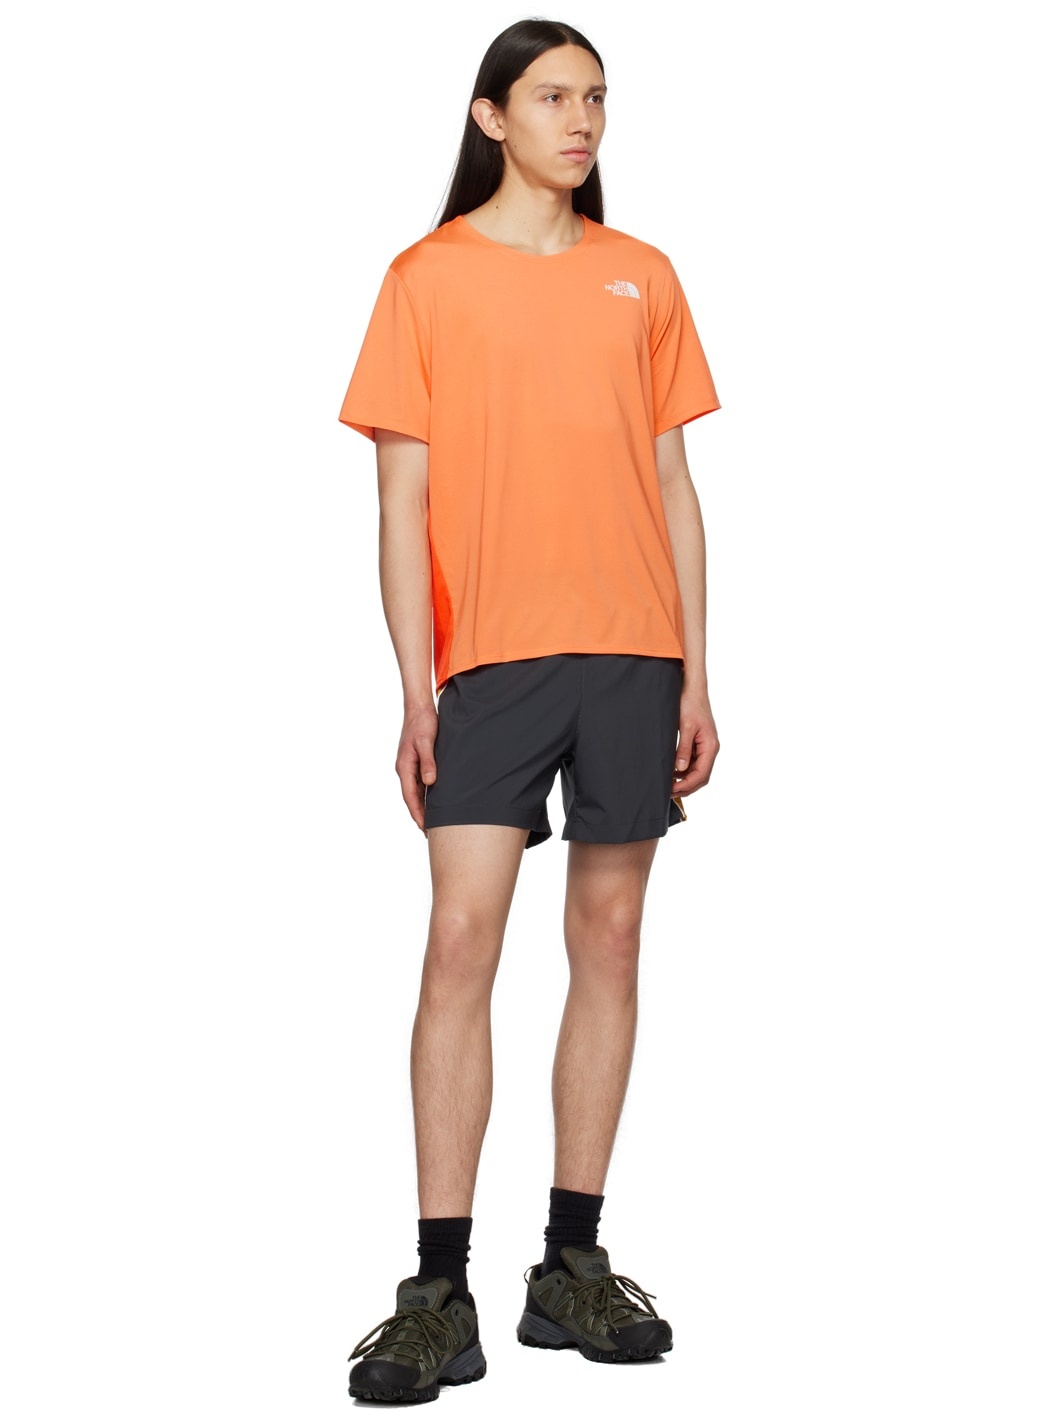 The North Face Elevation shorts in orange